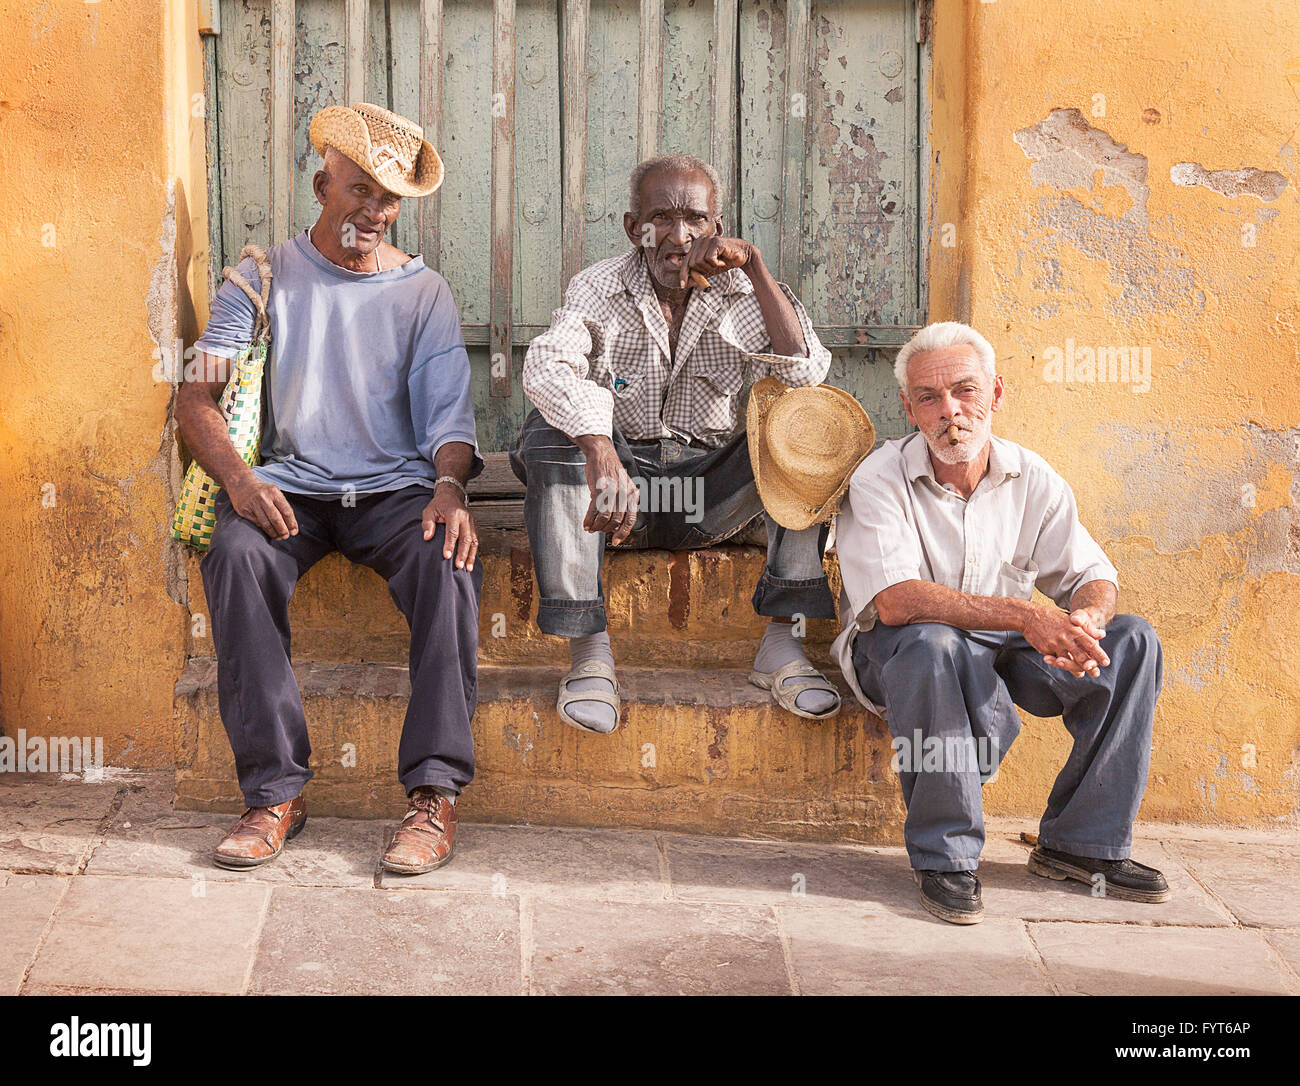 The Three Amigos. Three men sitting together on a doorstep in Trinidad, Cuba. They seem to be old retired friends passing the time in the sunshine. Stock Photo